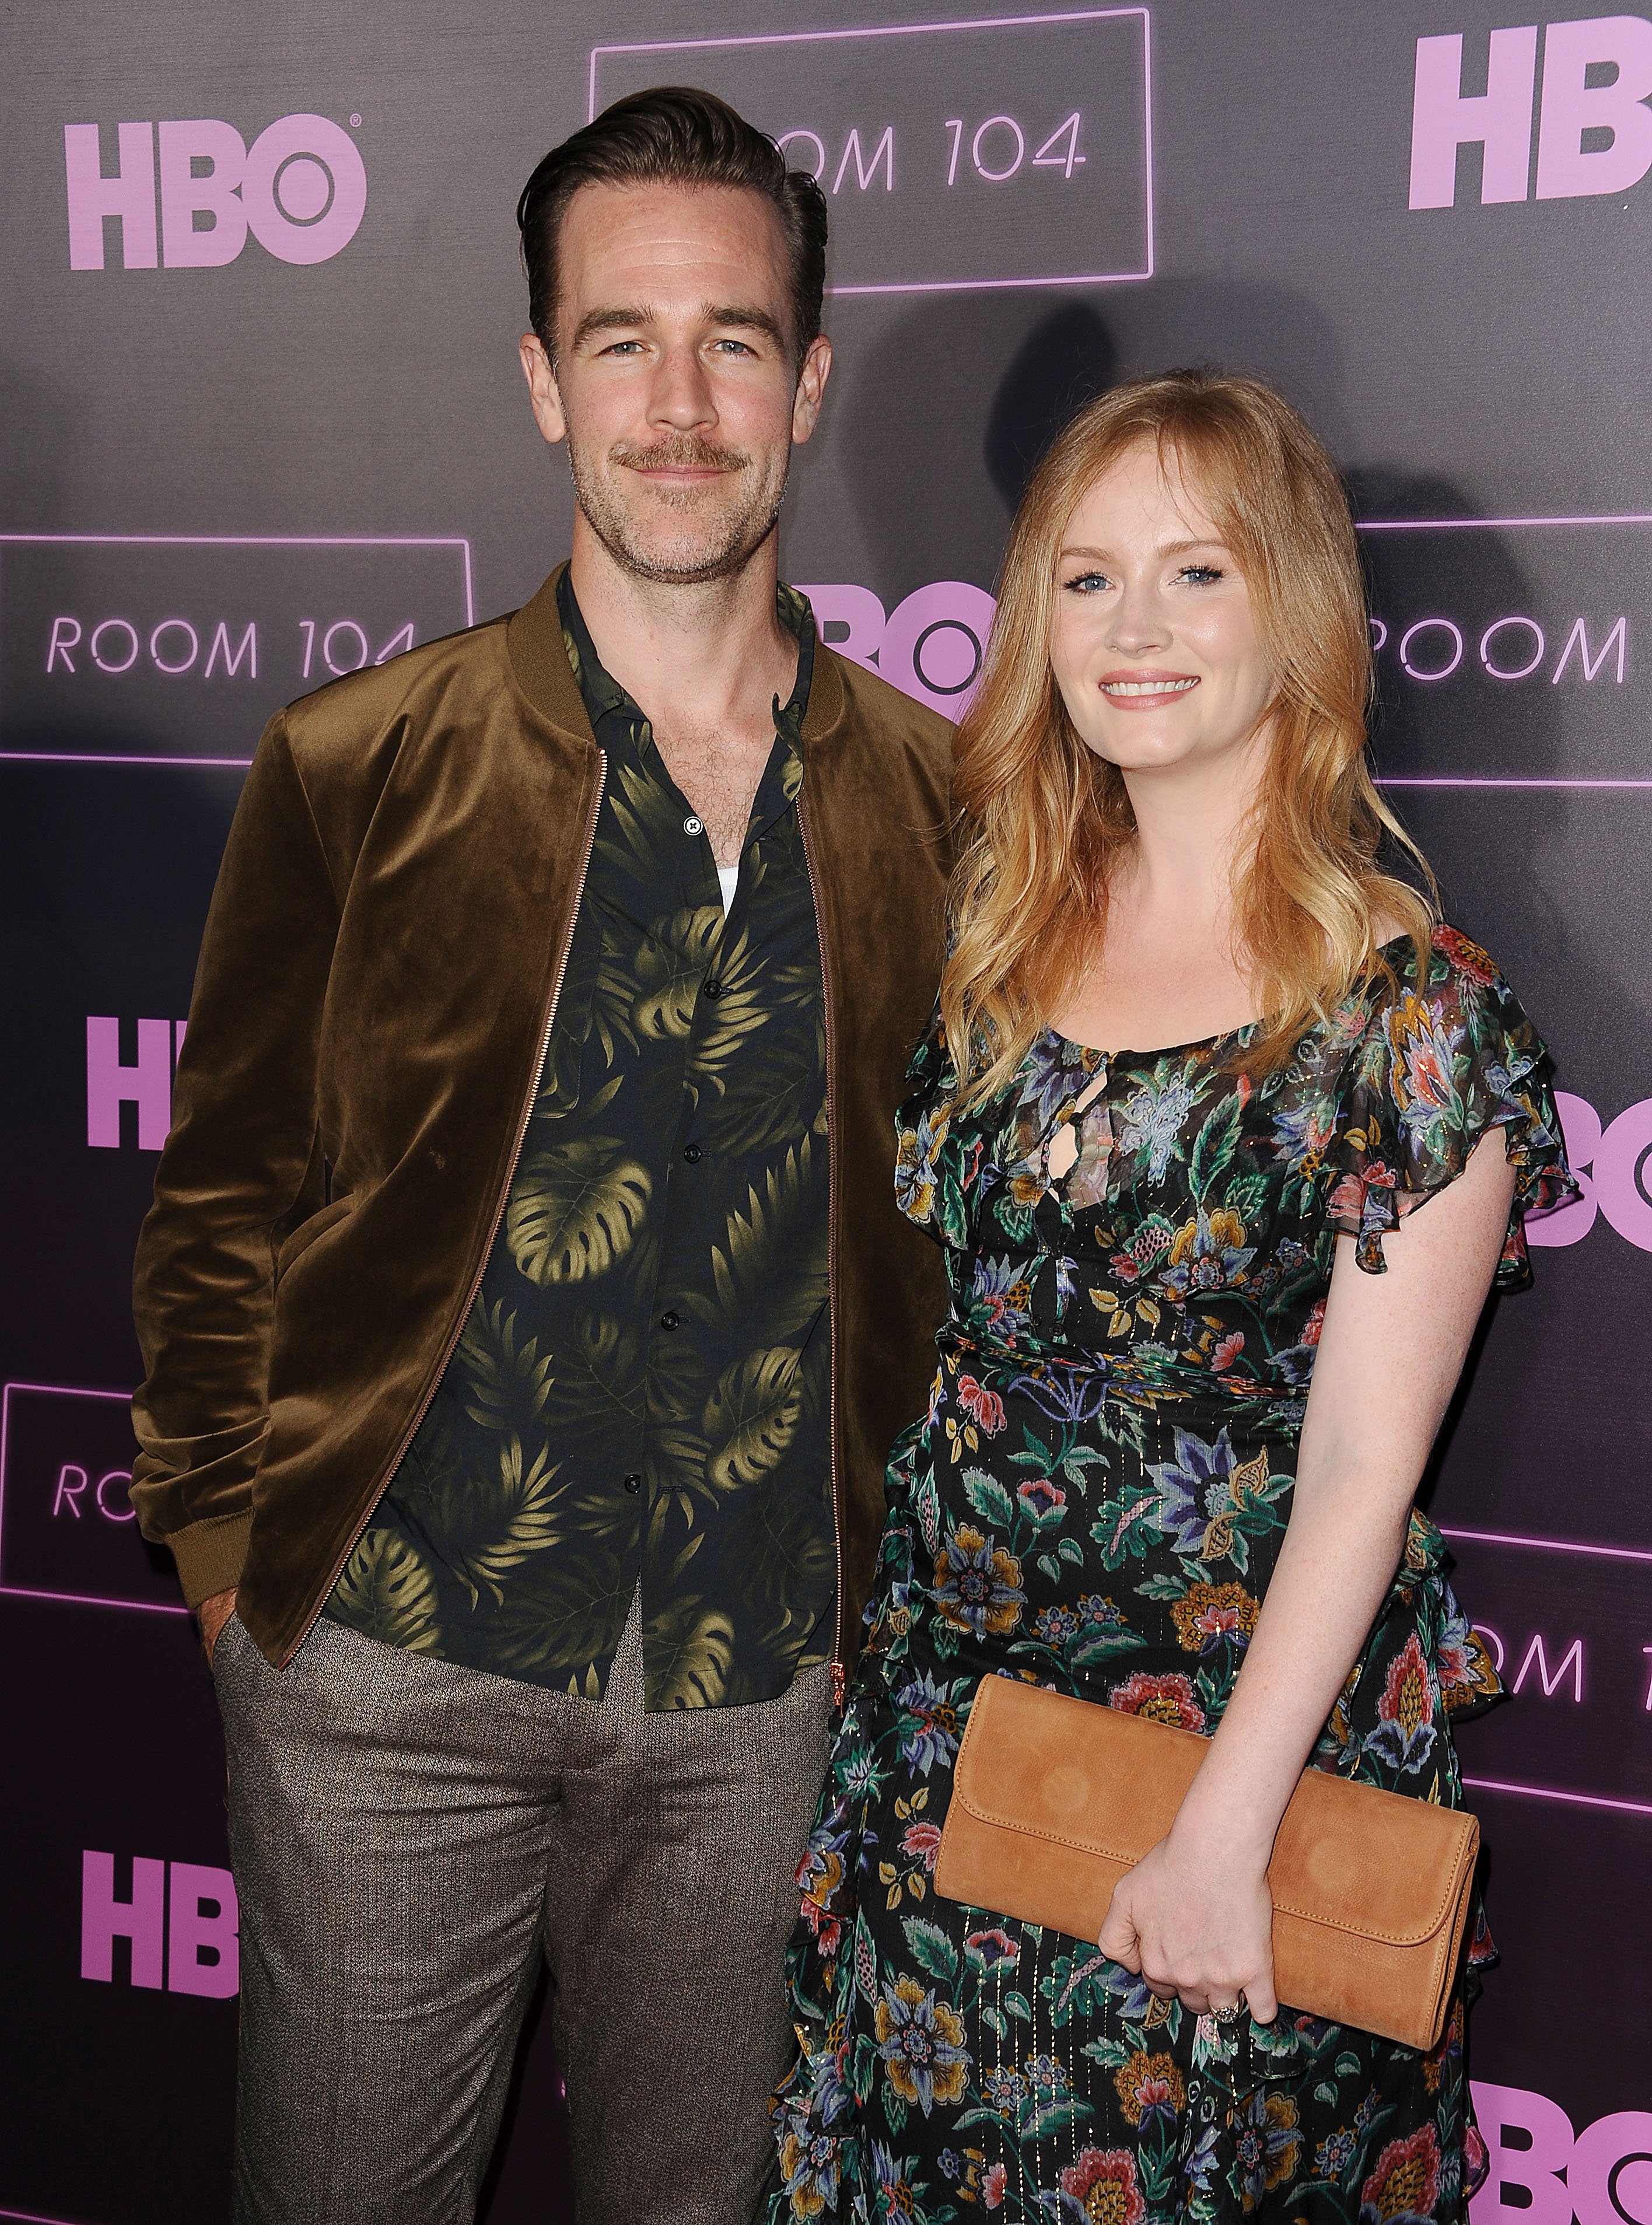 James Van Der Beek and his wife Kimberly Brook attend the premiere of "Room 104" at Hollywood Forever | Source: Getty Images